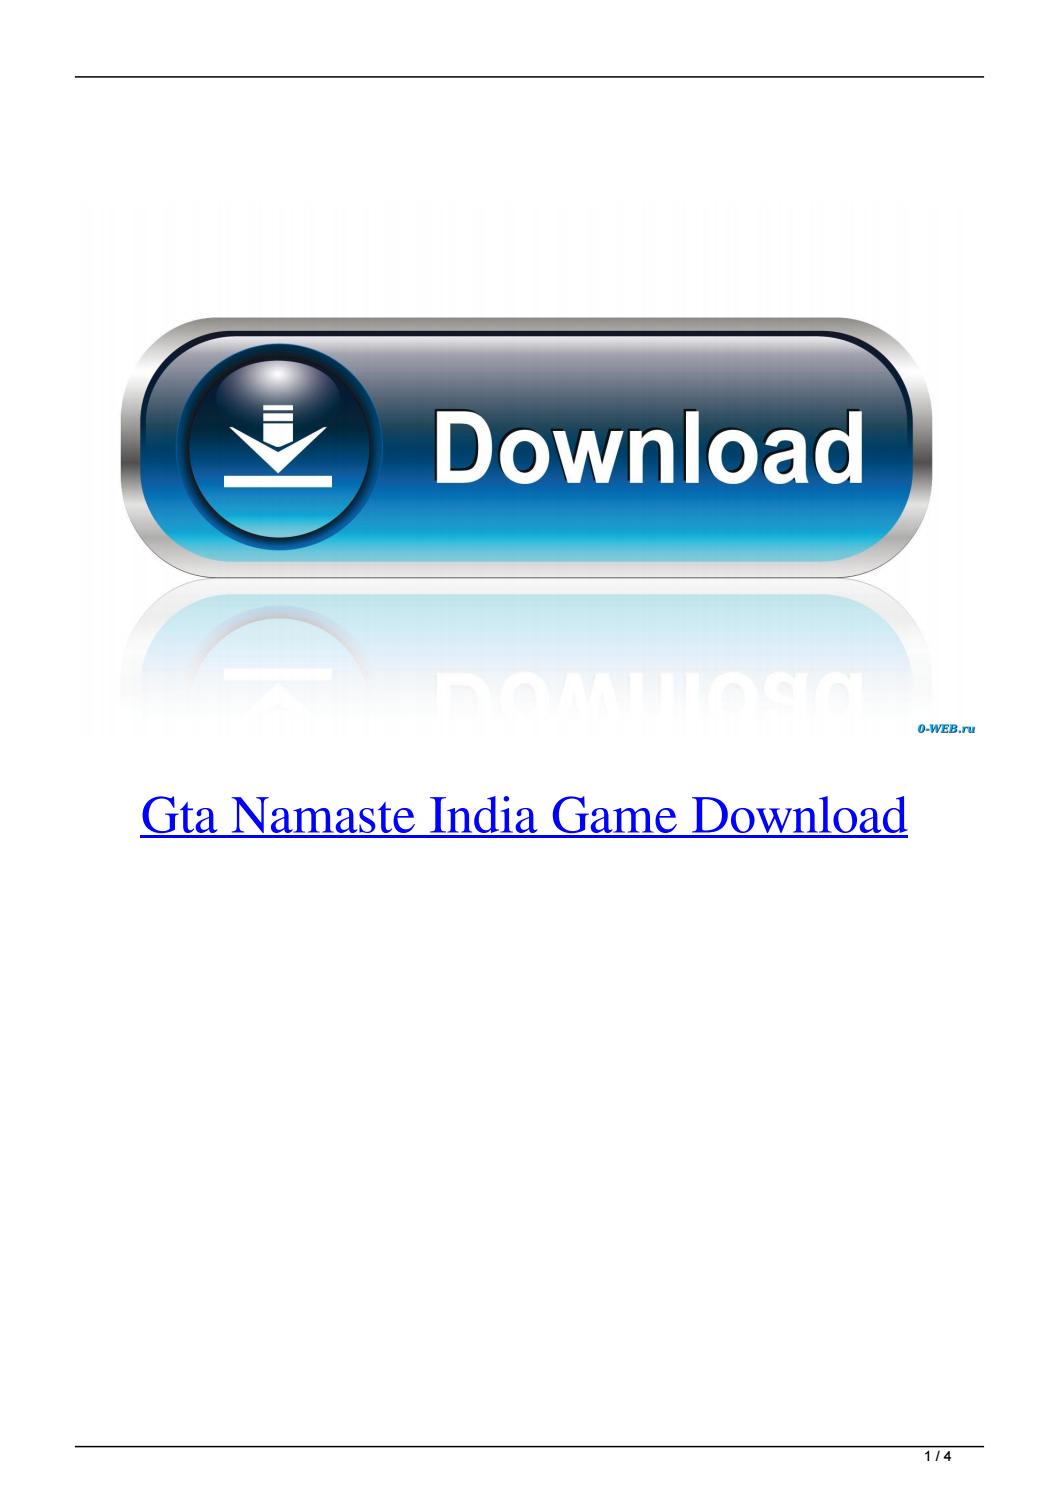 gta namaste india apk download for android